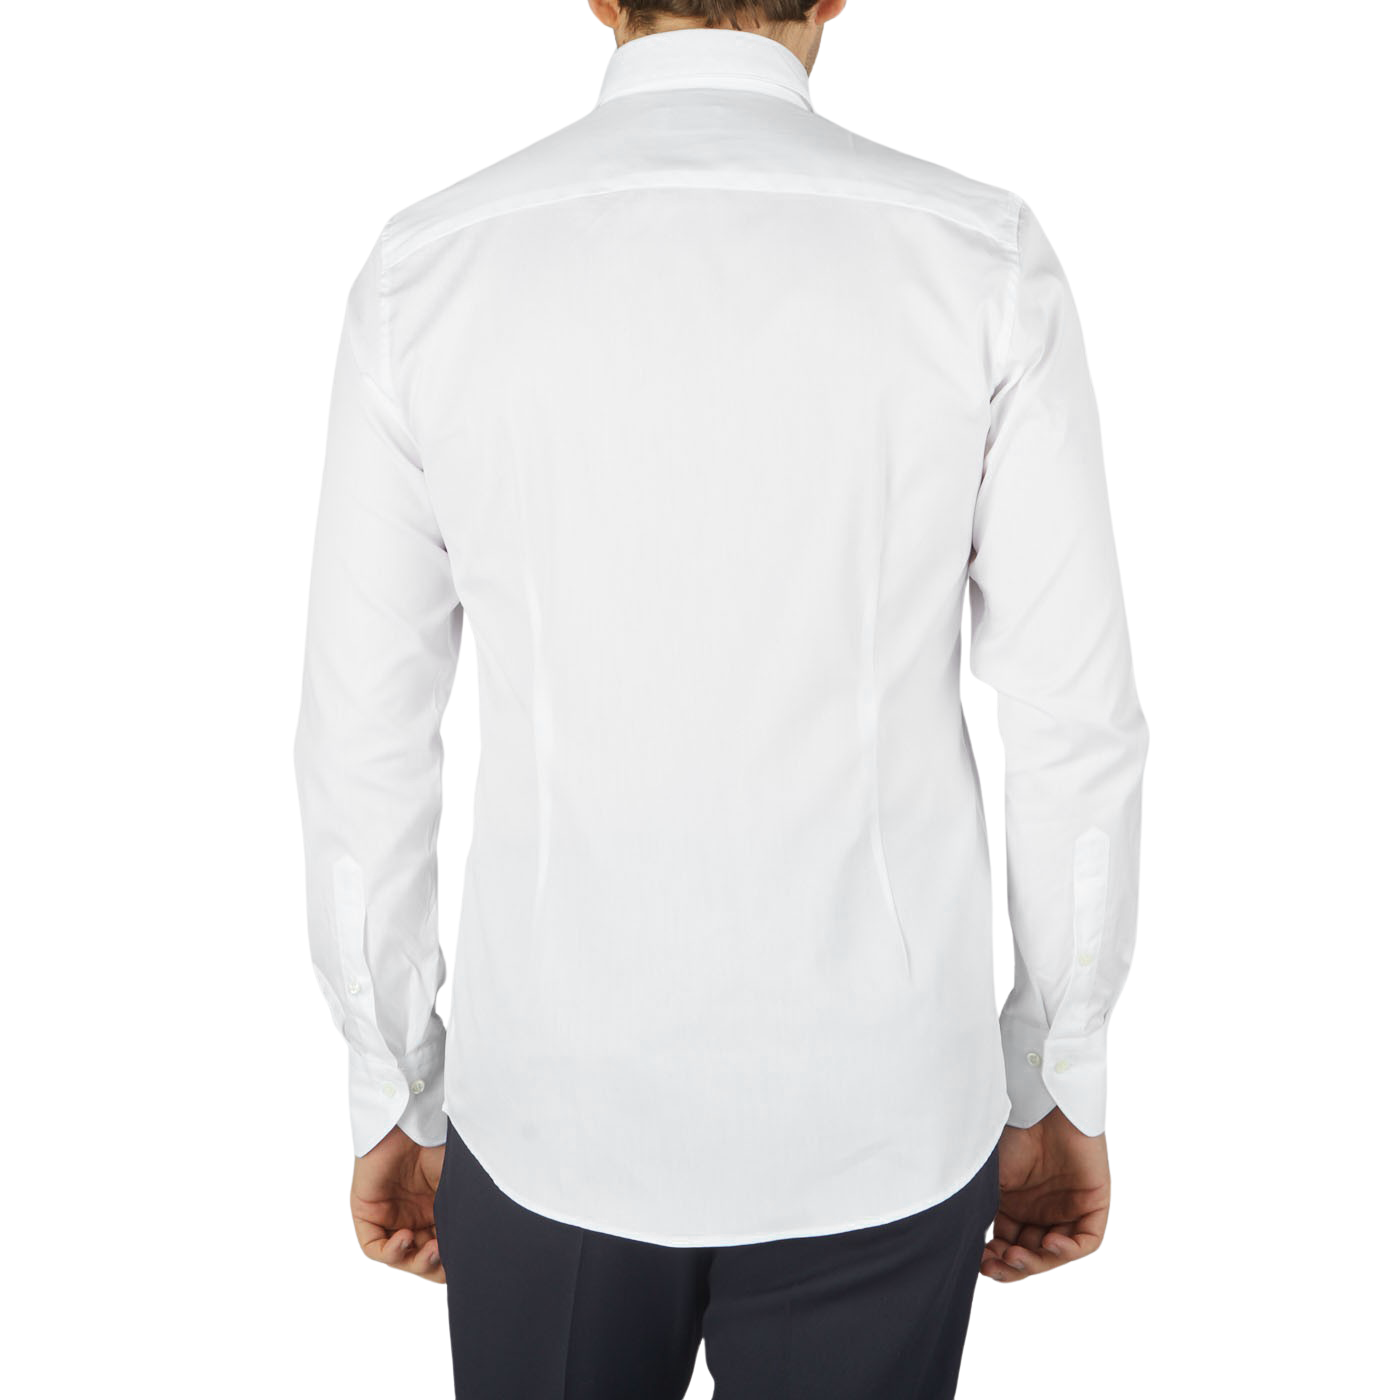 The back view of a man wearing a Stenströms White Cotton Oxford Fitted Body BD Shirt.